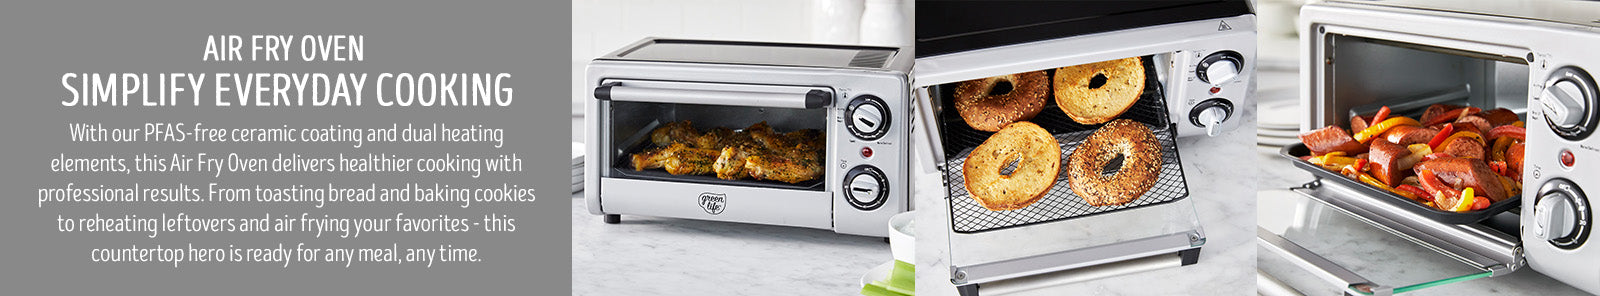 GreenLife Countertop Stainless Steel Toaster Oven Air Fryer, PFAS-Free,  Ceramic Nonstick Tray Rack and Airfry Basket, Dual Heating, 4 Slice  Capacity